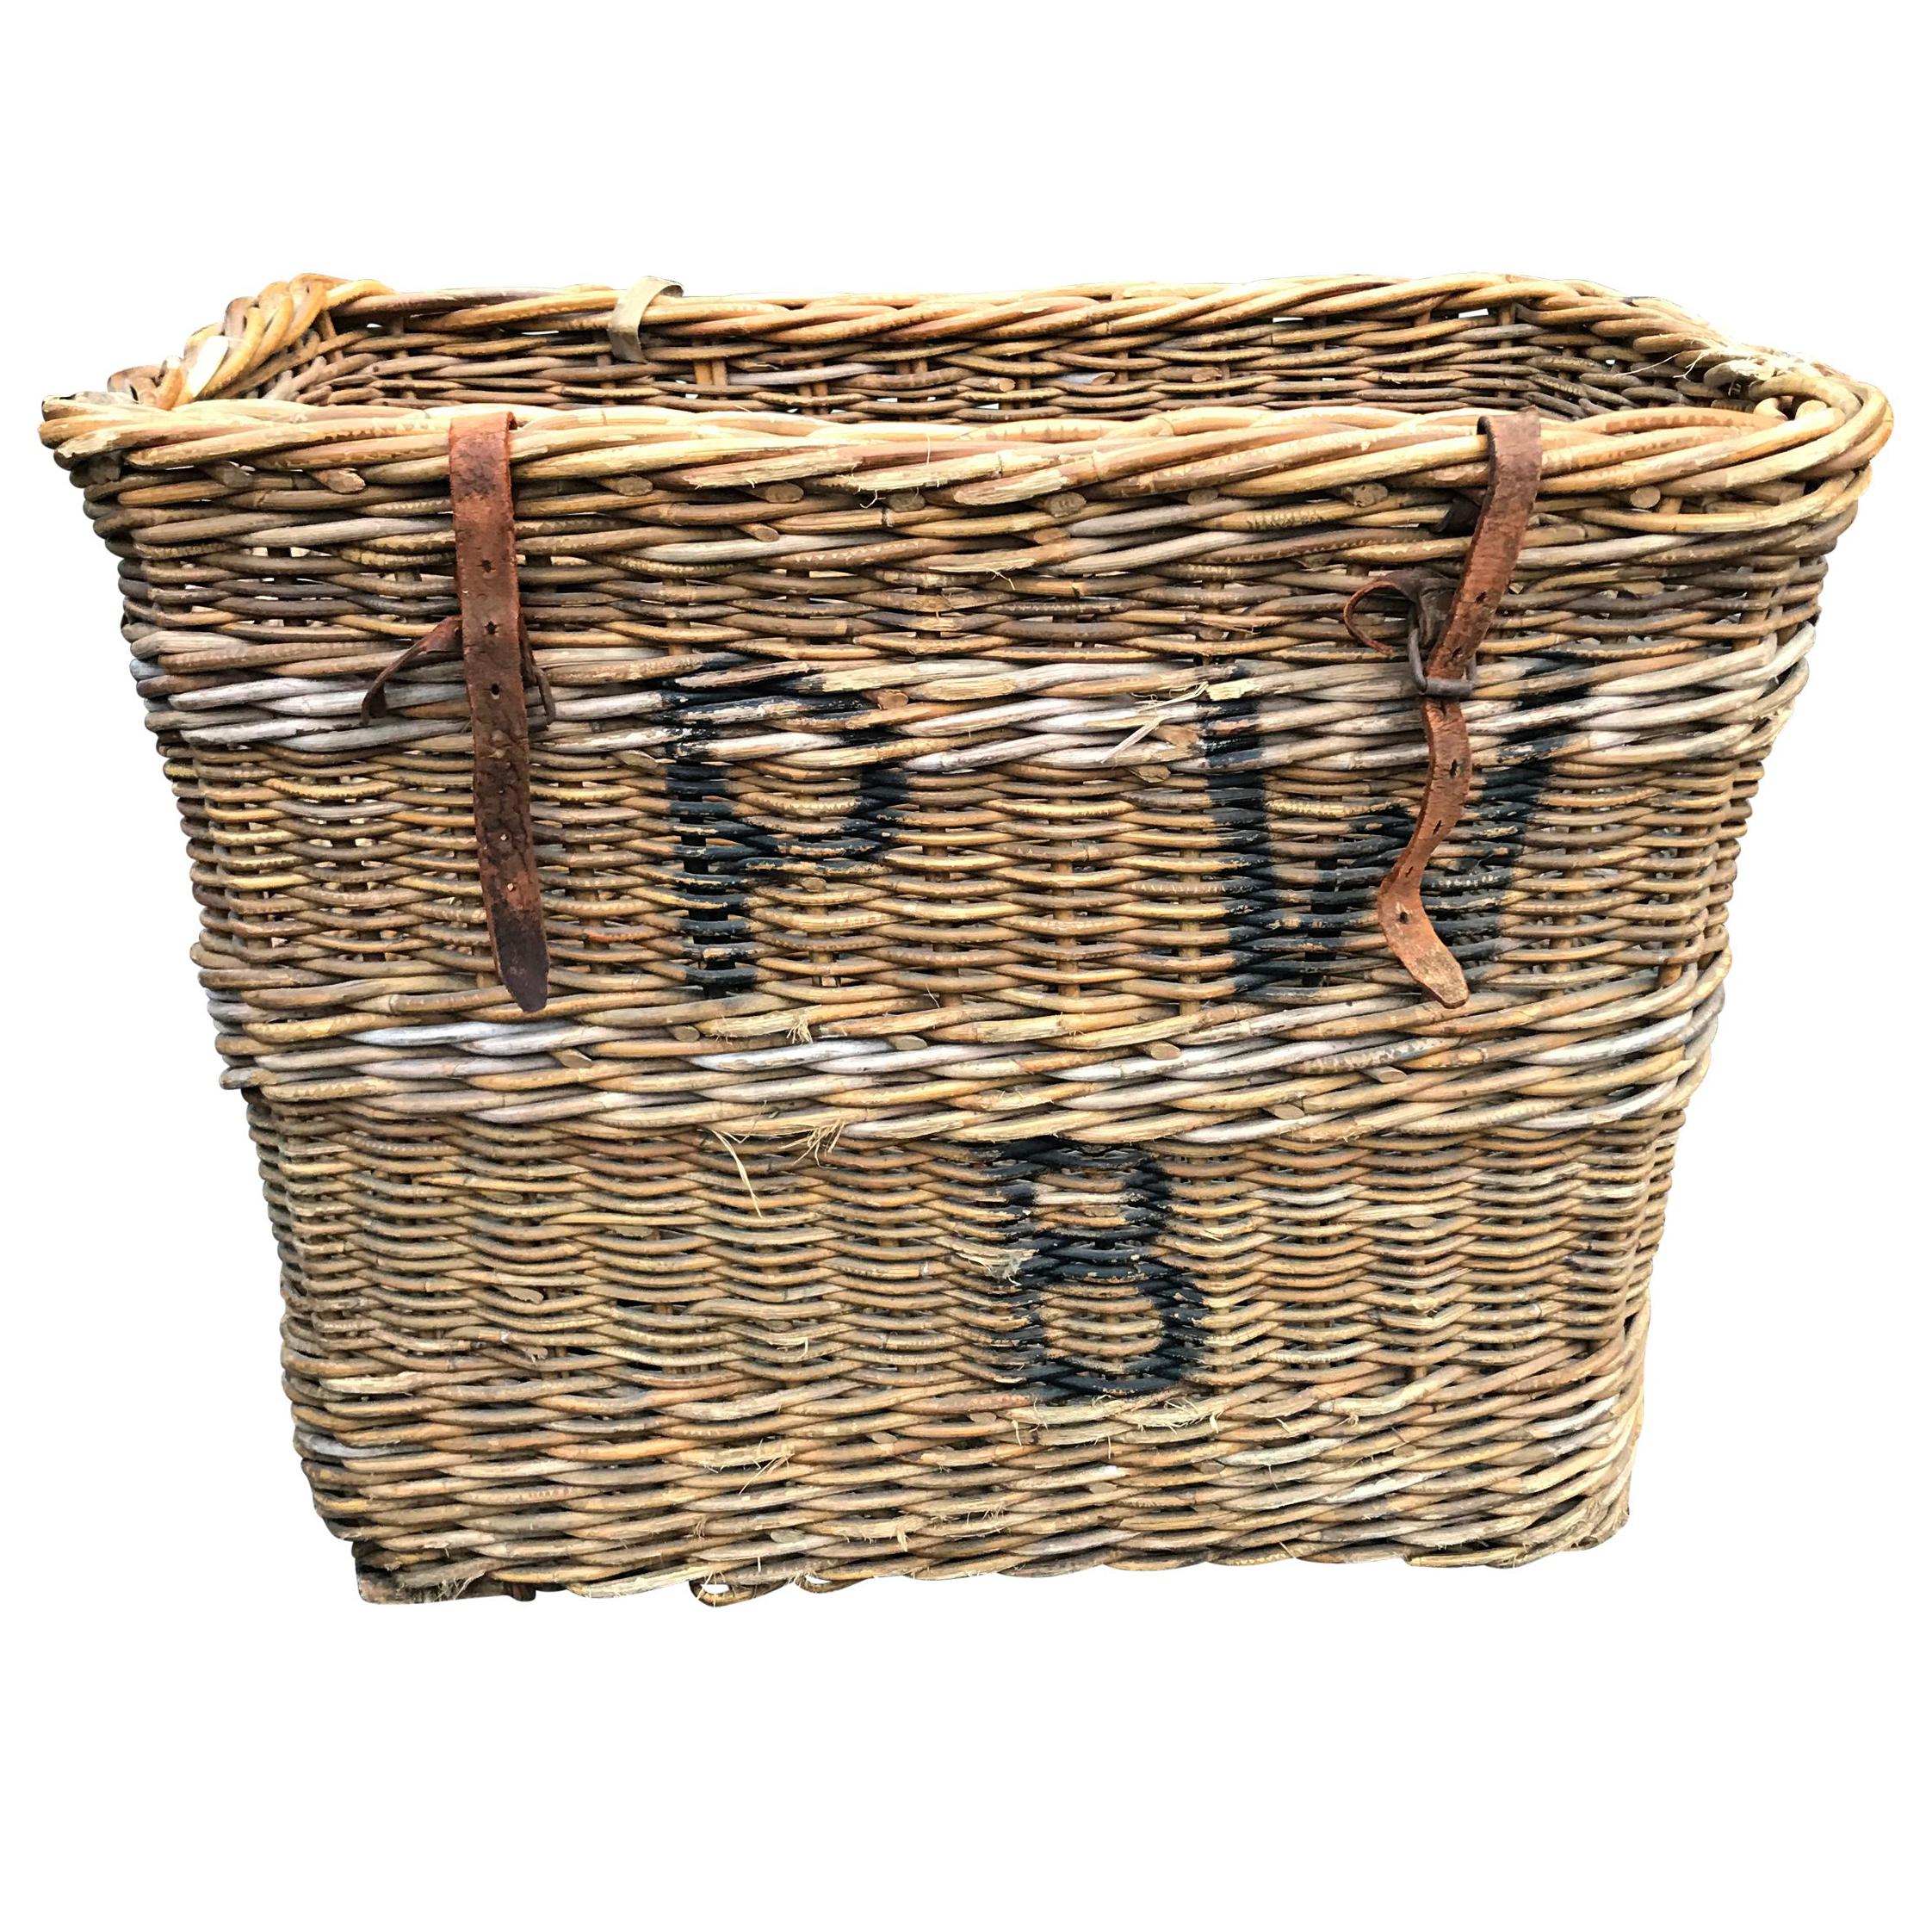 Early 20th Century French Vineyard Basket